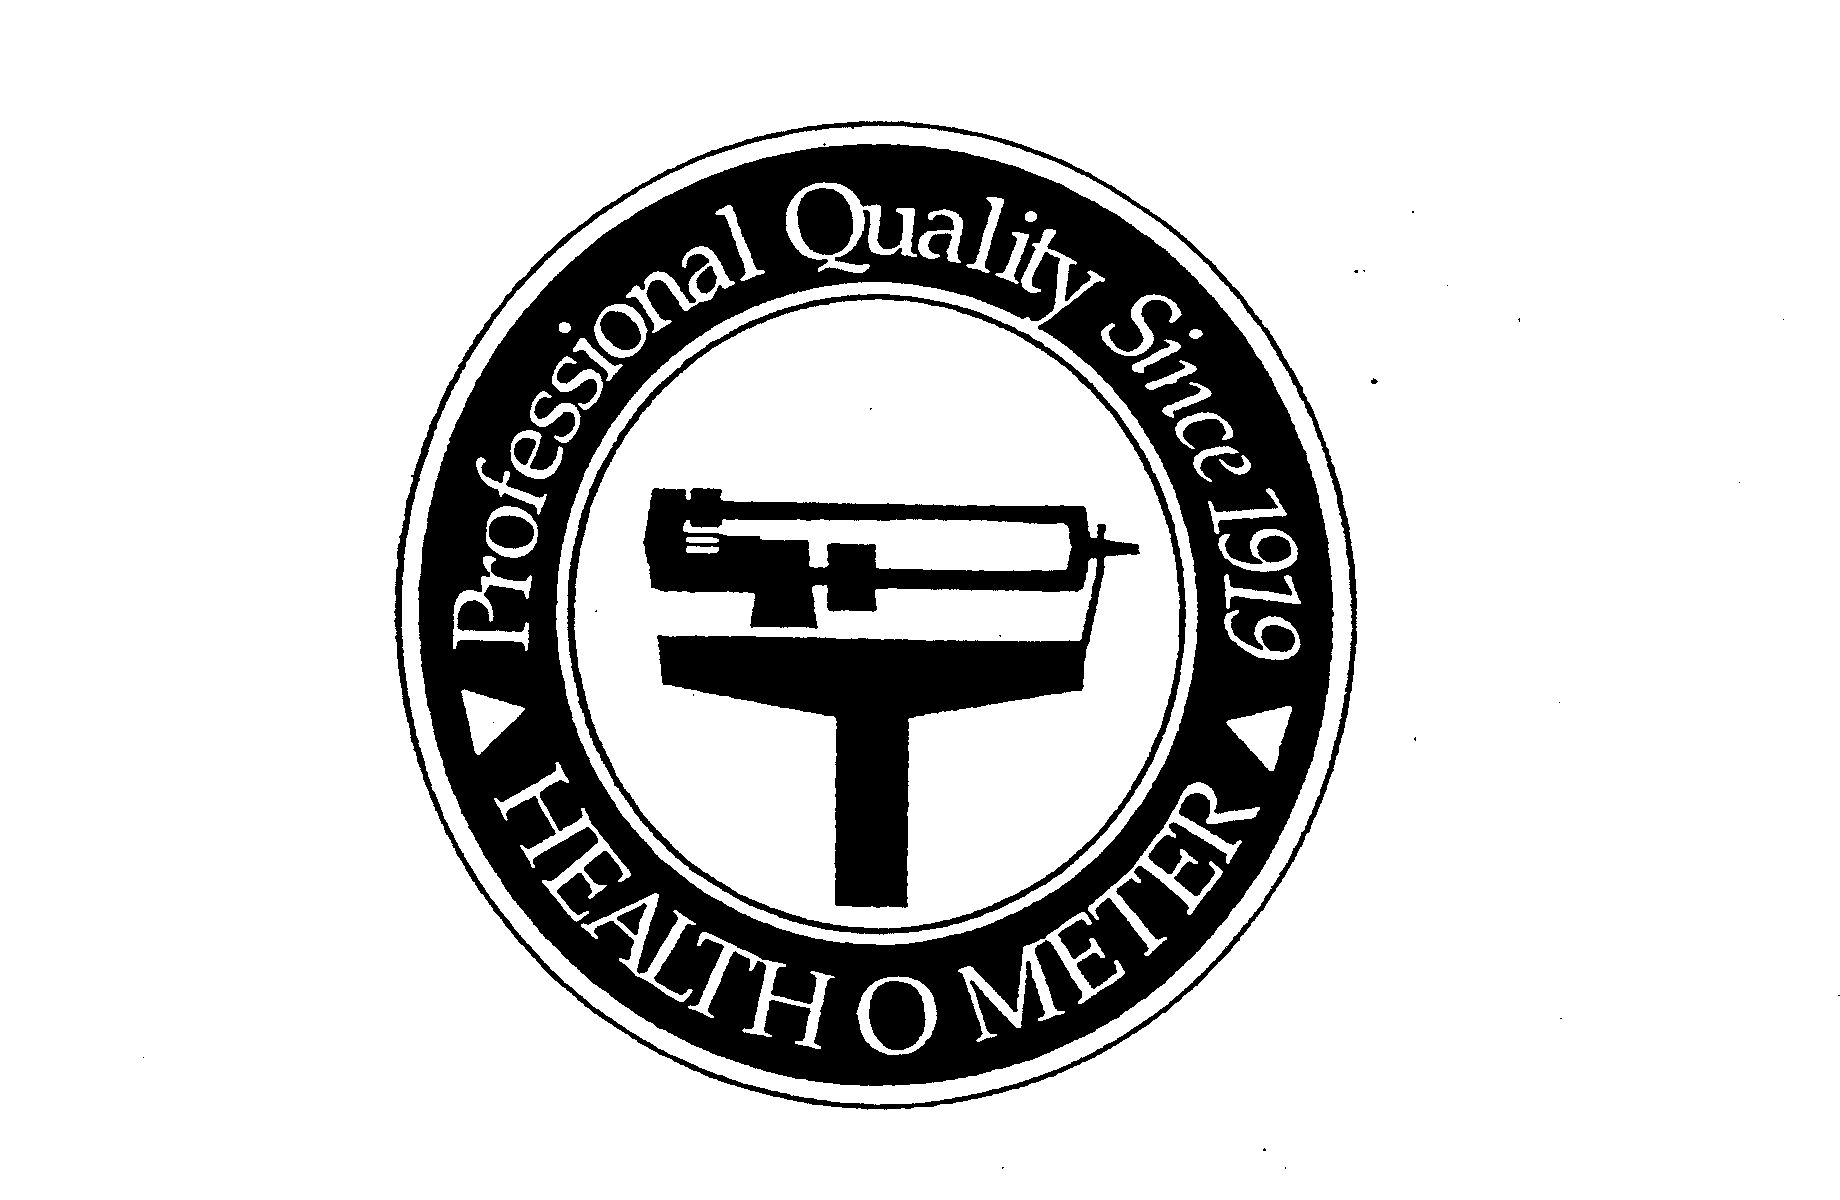  HEALTH O METER PROFESSIONAL QUALITY SINCE 1919